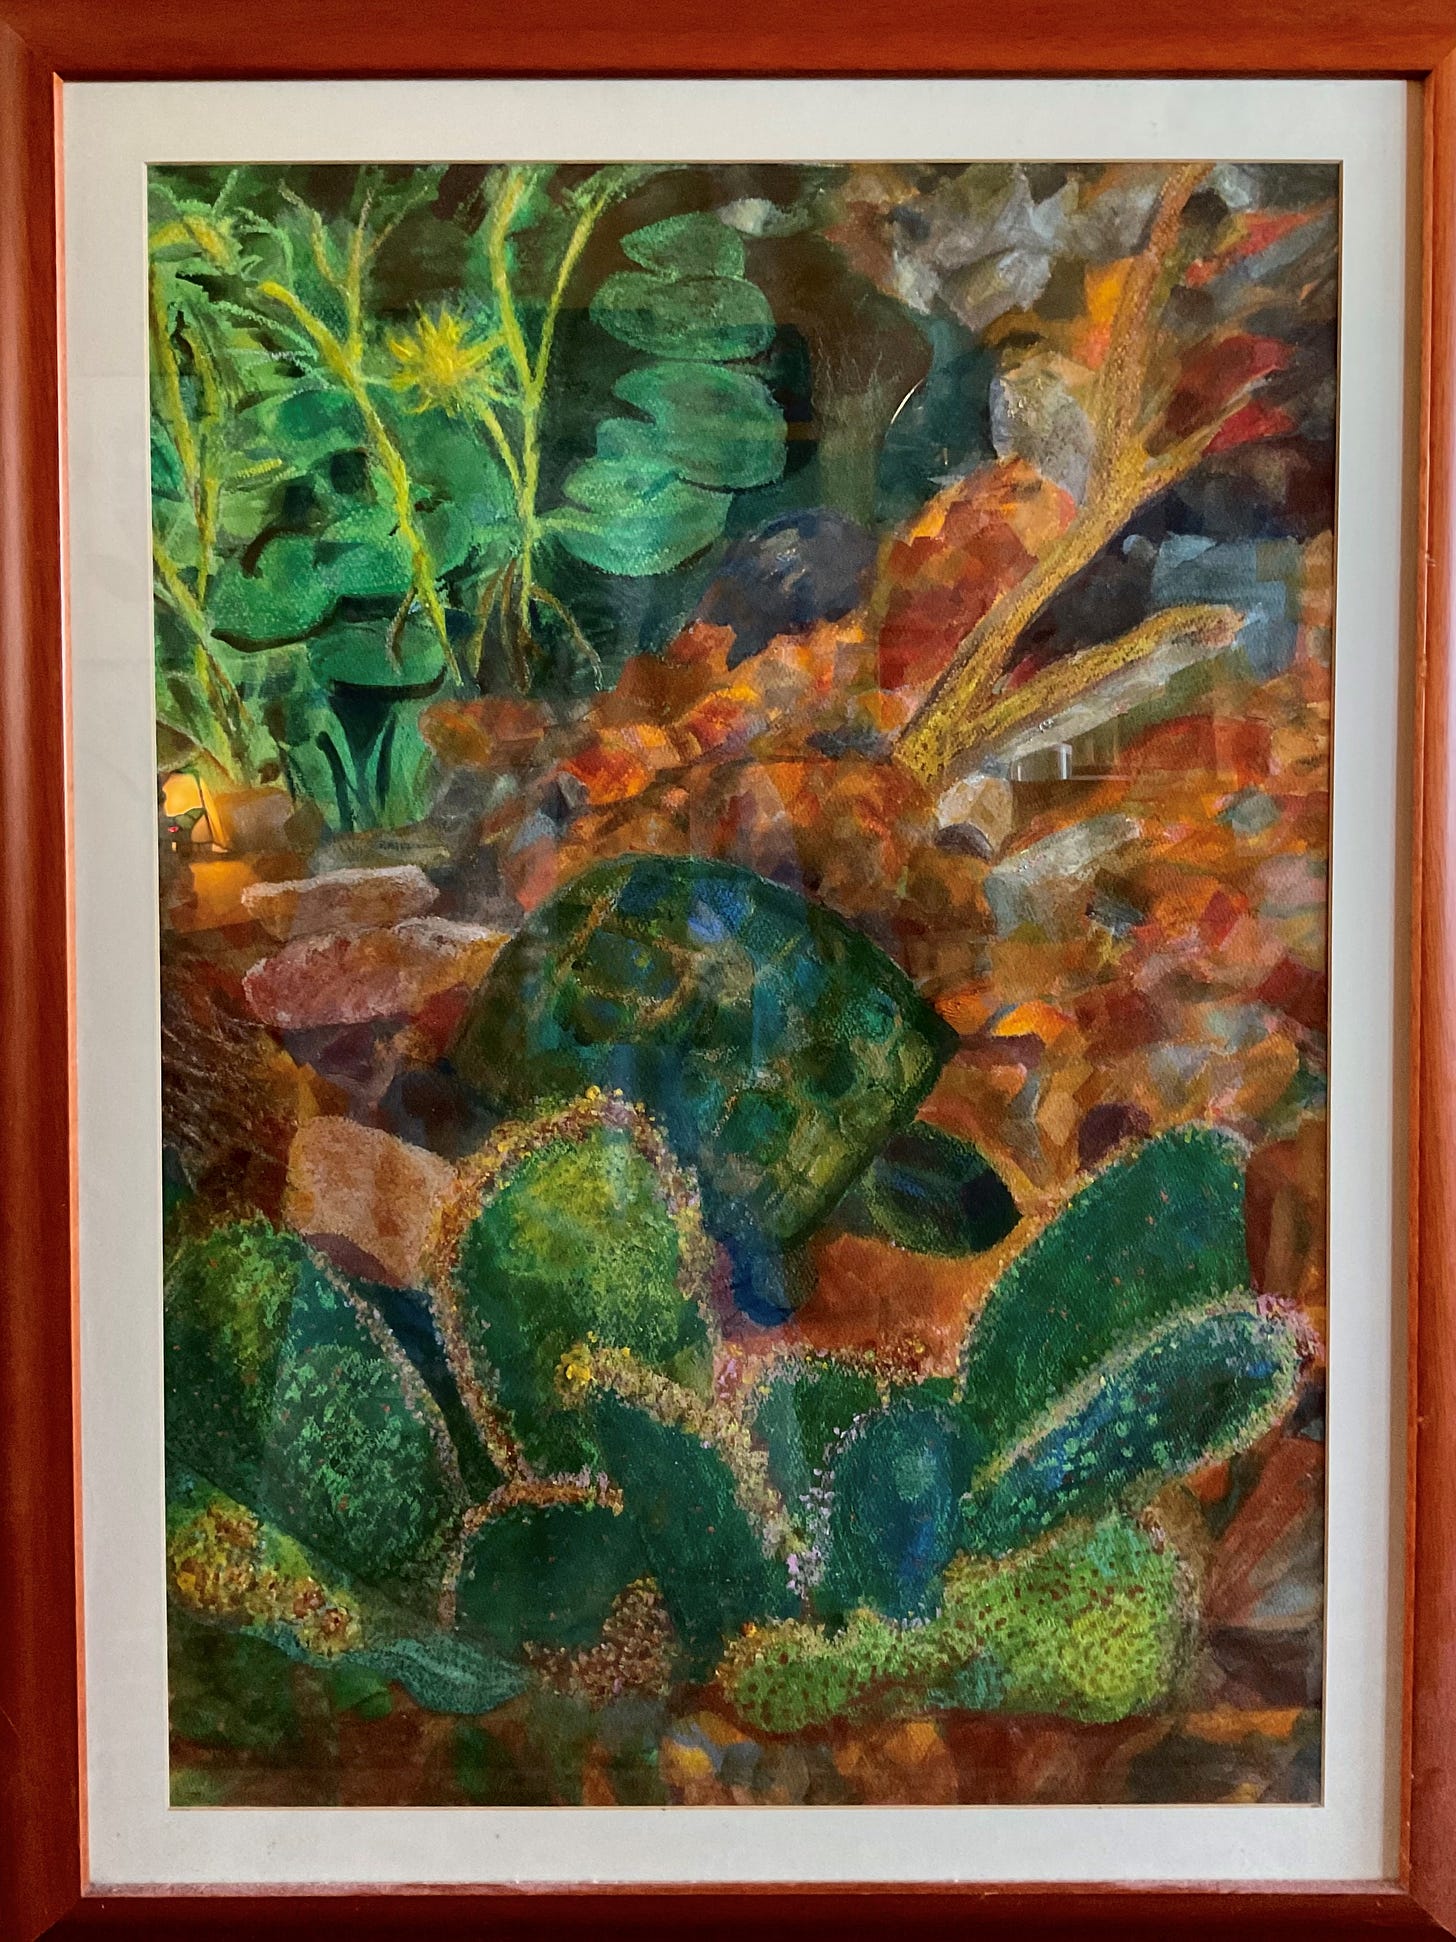 Mixed media painting by Sherry Killam Arts depicting a green shelled tortoise in an earthy habitat of lily pads, cactus plants, colored rocks and twigs.